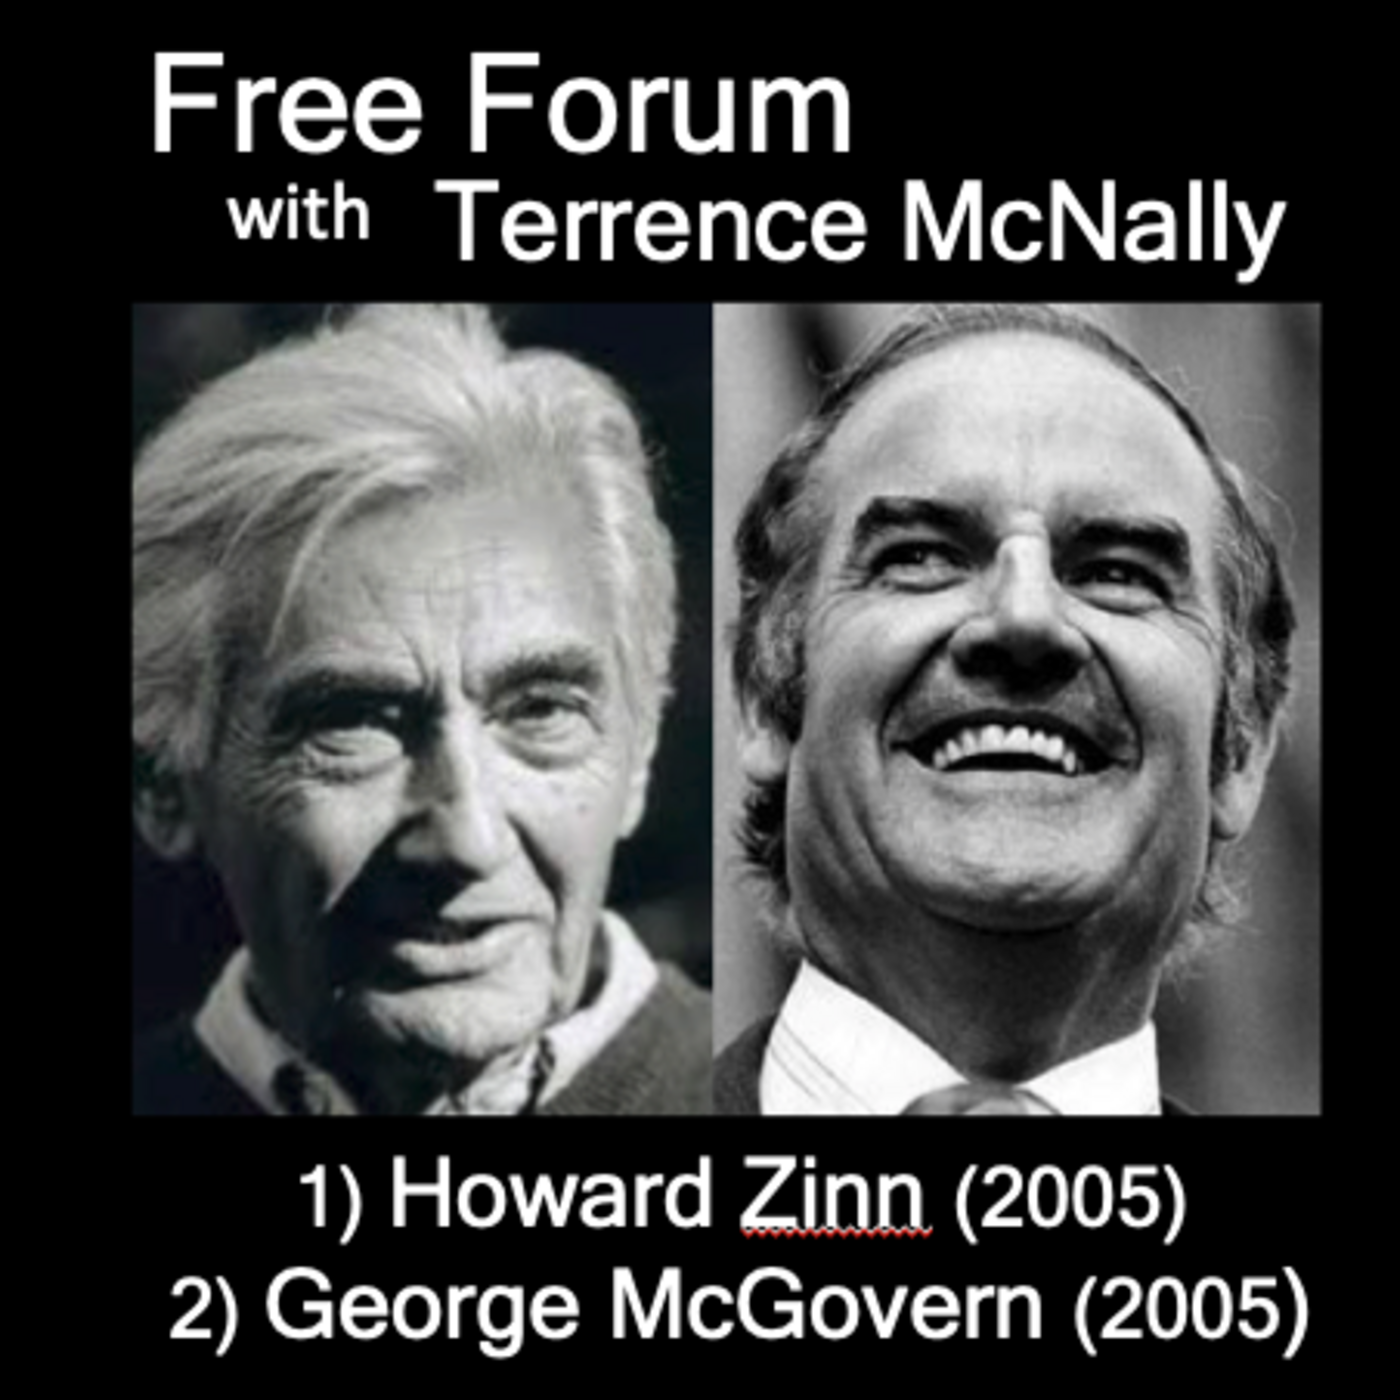 Episode 567: American Heroes-1) HOWARD ZINN (2005), 2) GEORGE McGOVERN (2005) - both born 100 years ago this summer